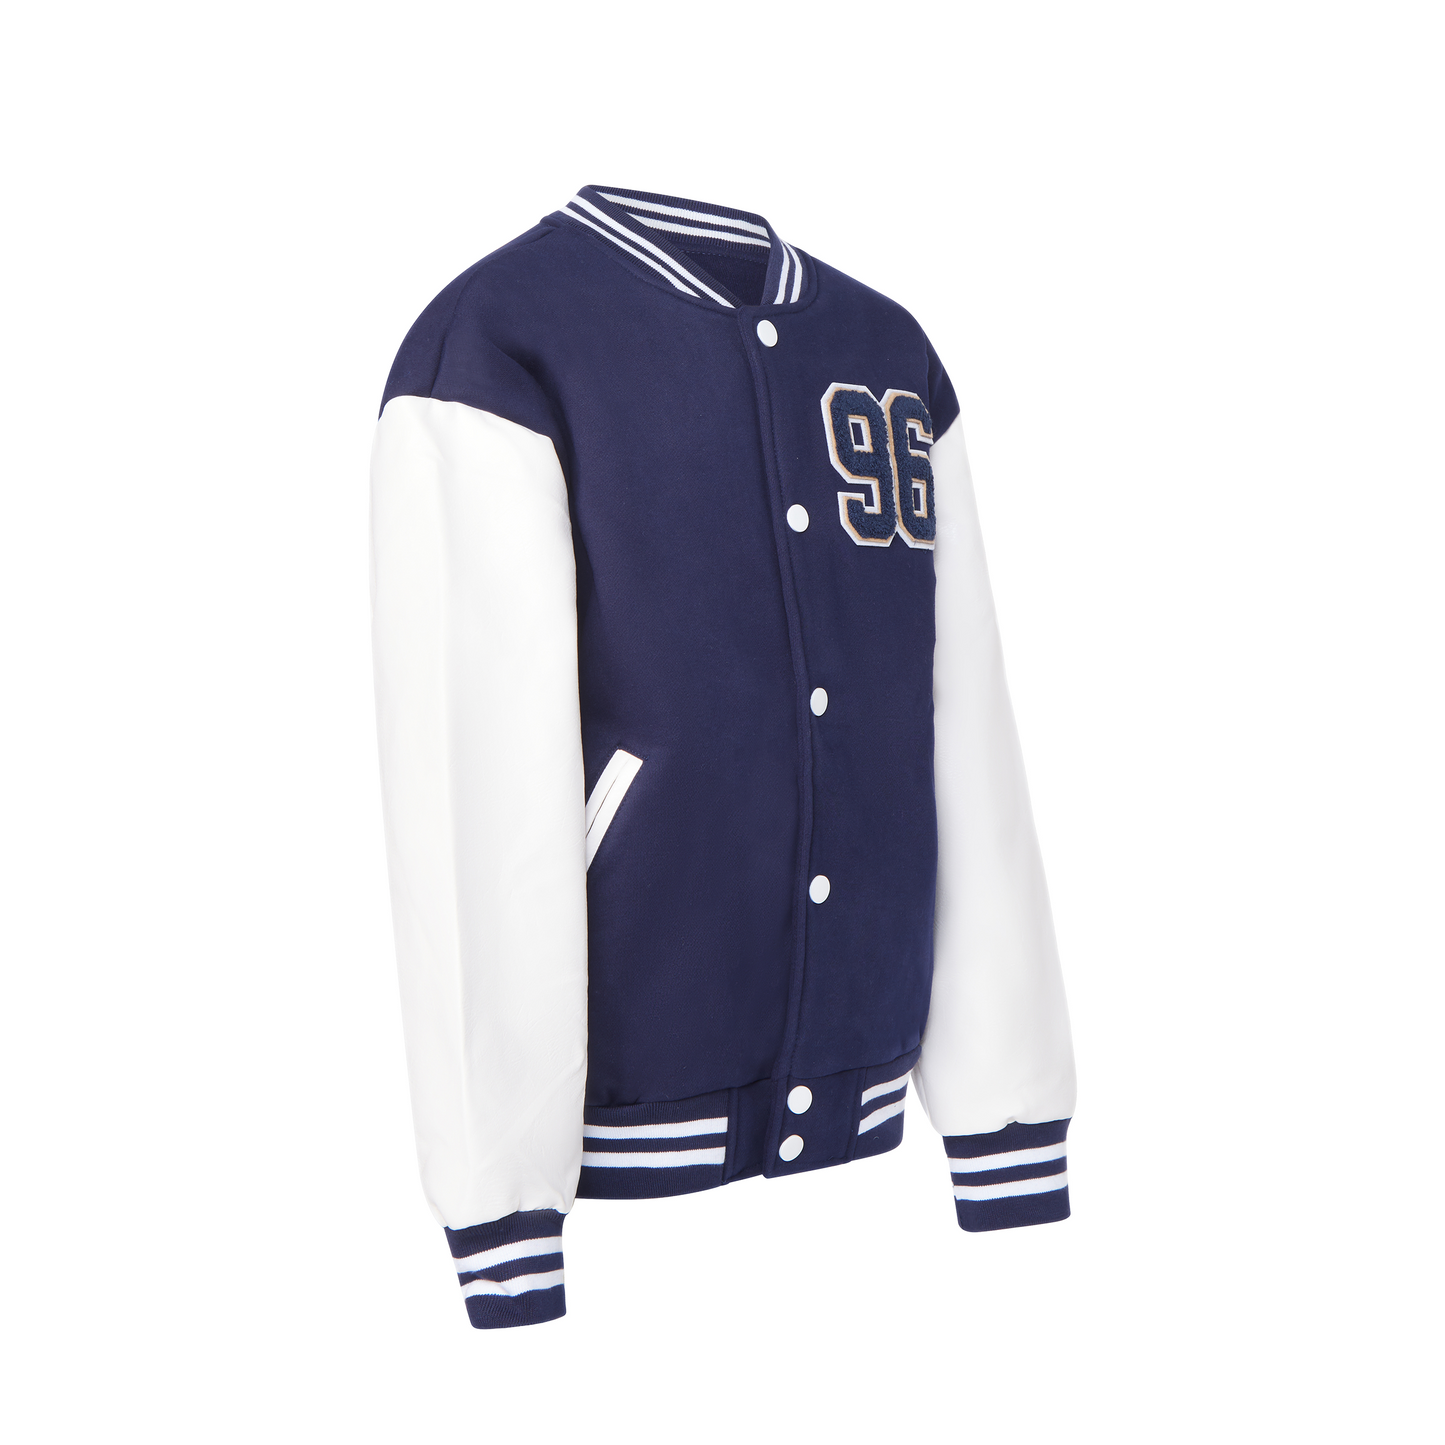 College Jacke 96 Collection